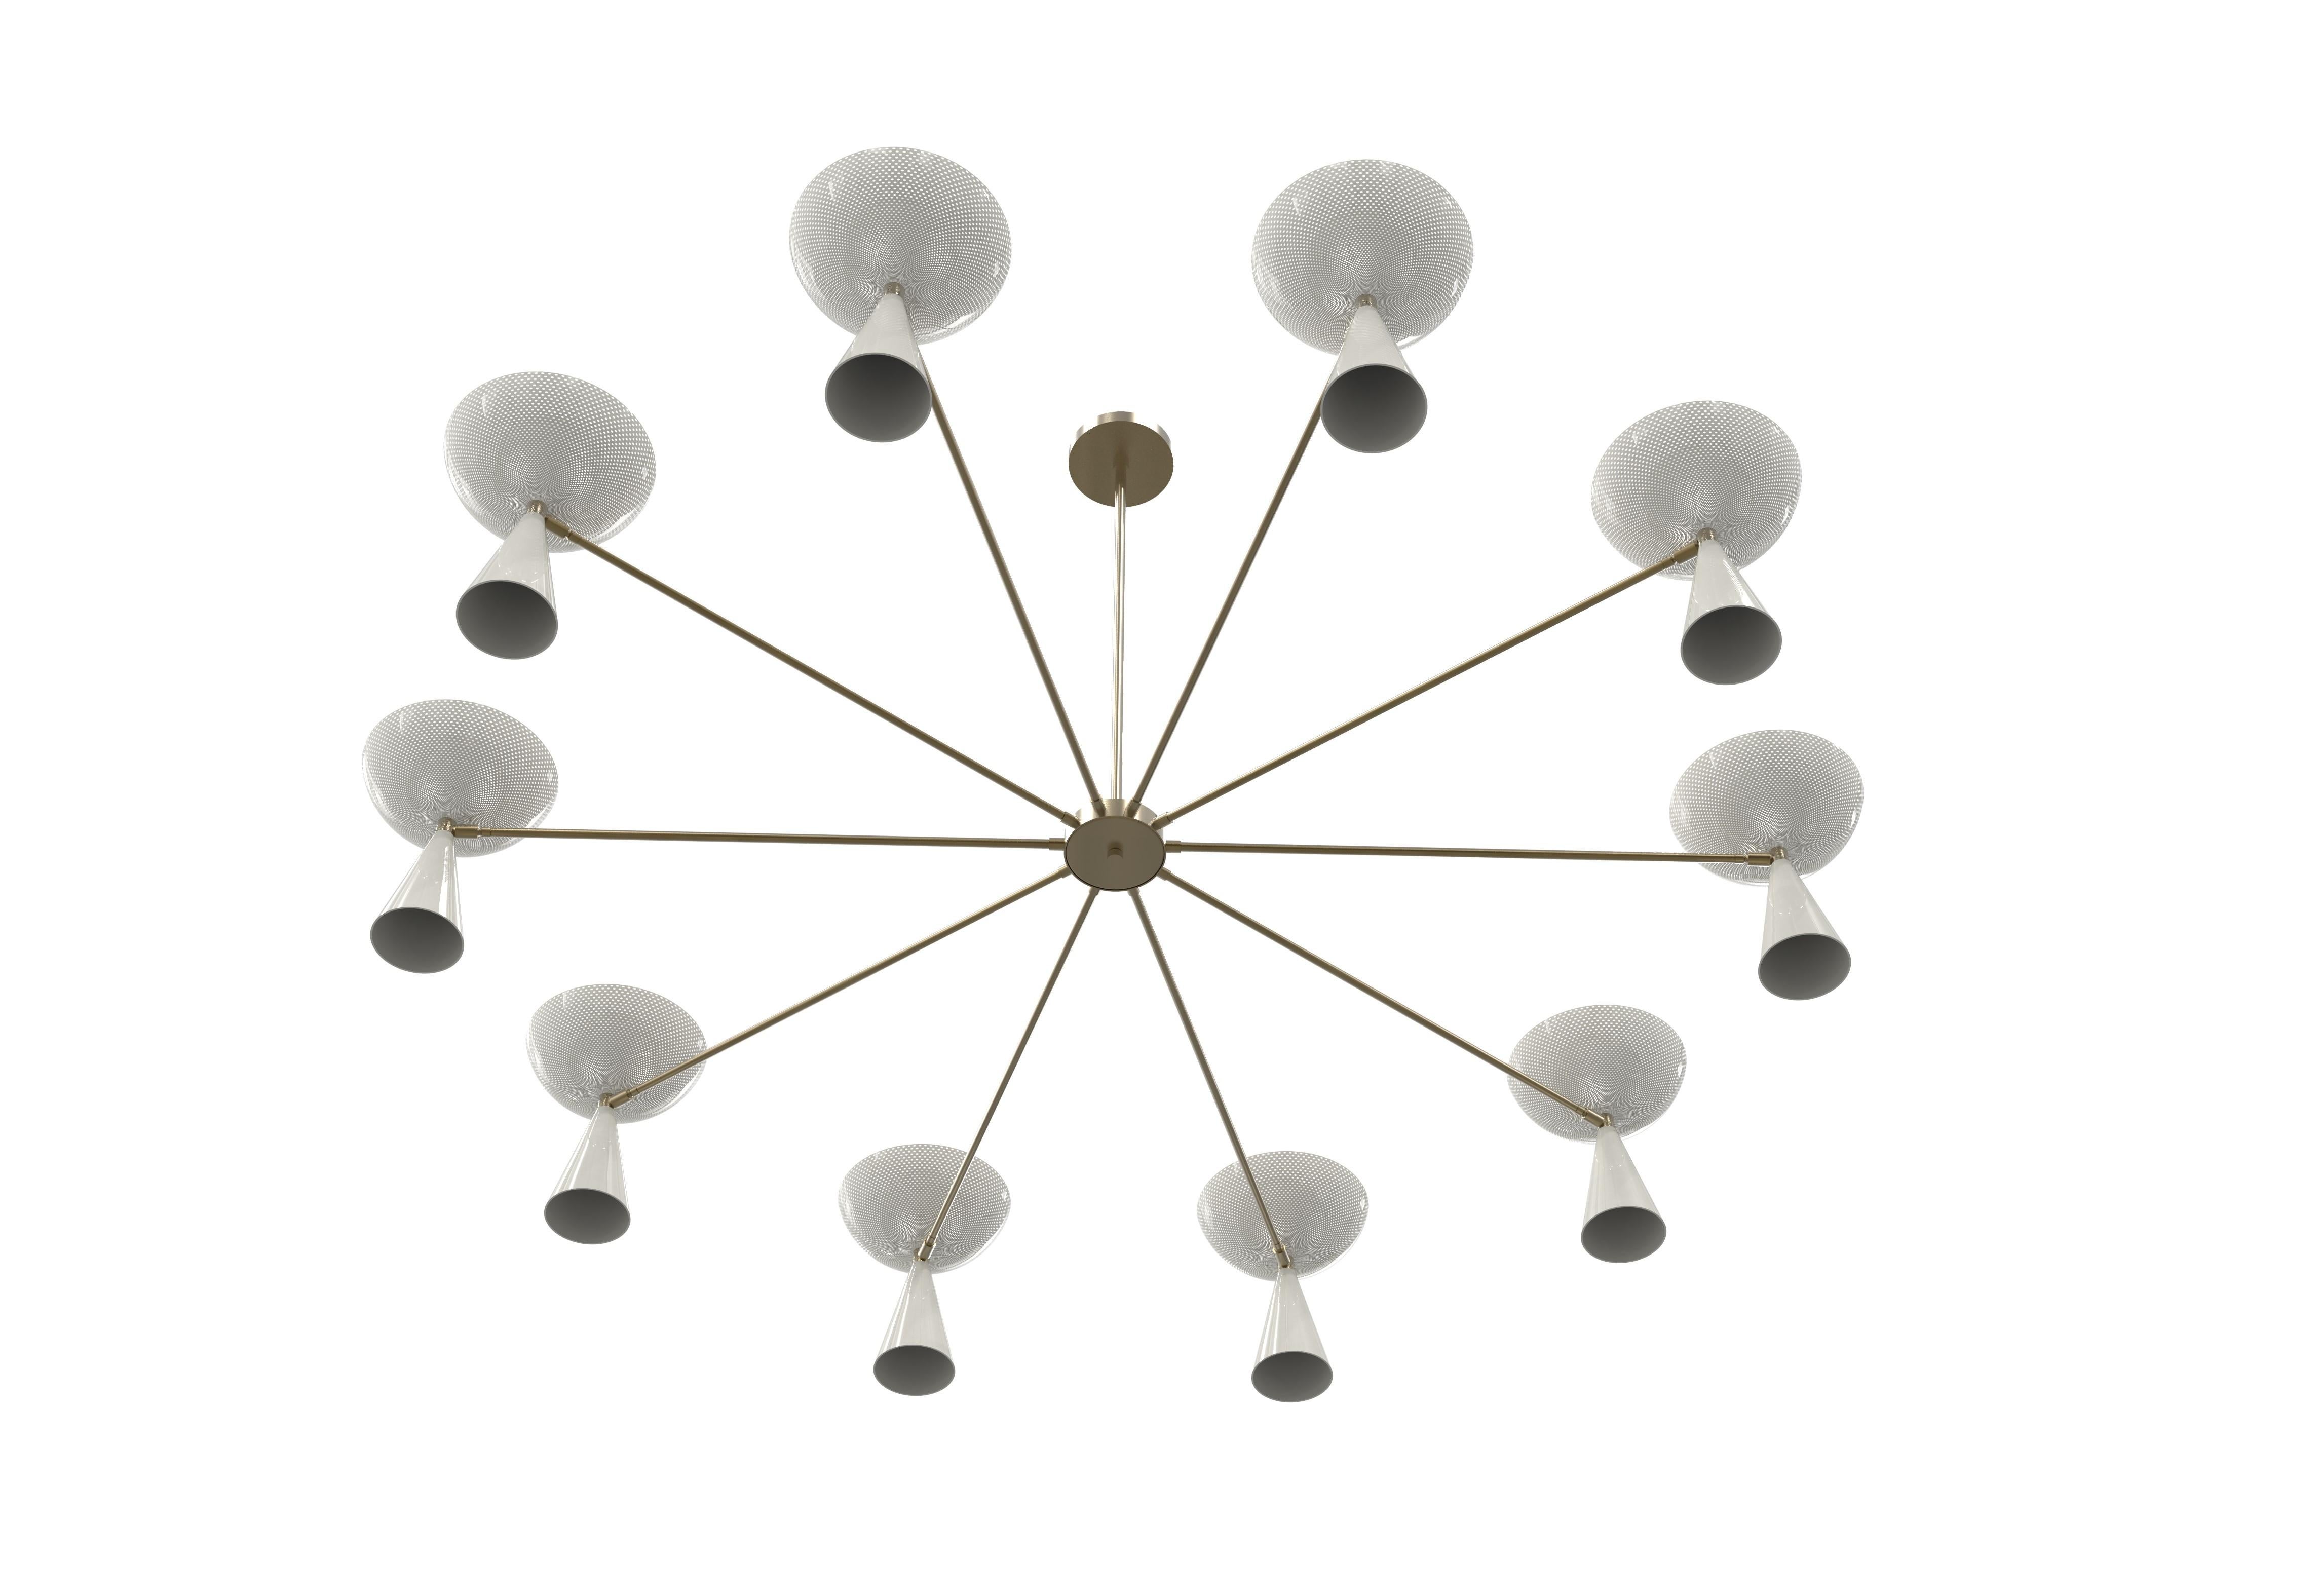 Grand Molto 10-Arm Brass & Enamel Chandelier, French Modern, Blueprint Lighting In New Condition For Sale In New York, NY